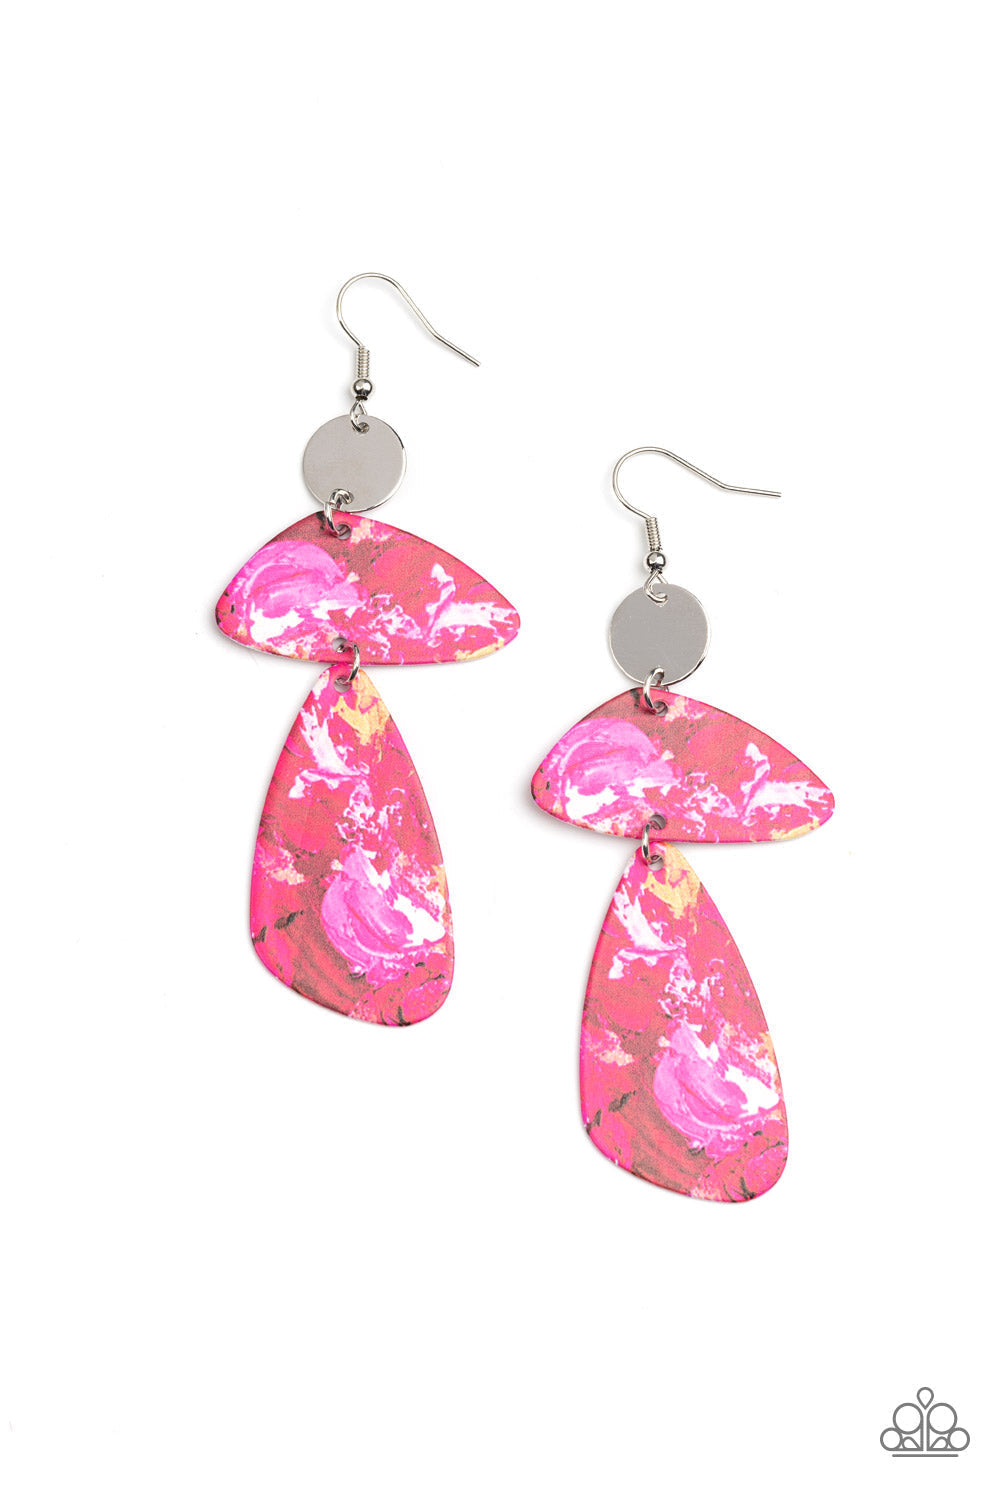 SWATCH Me Now - Pink and Silver Earrings - Paparazzi Accessories - Painted in abstract pink details, a pair of asymmetrical frames swing from the bottom of a dainty silver disc for artsy fashion earrings. 